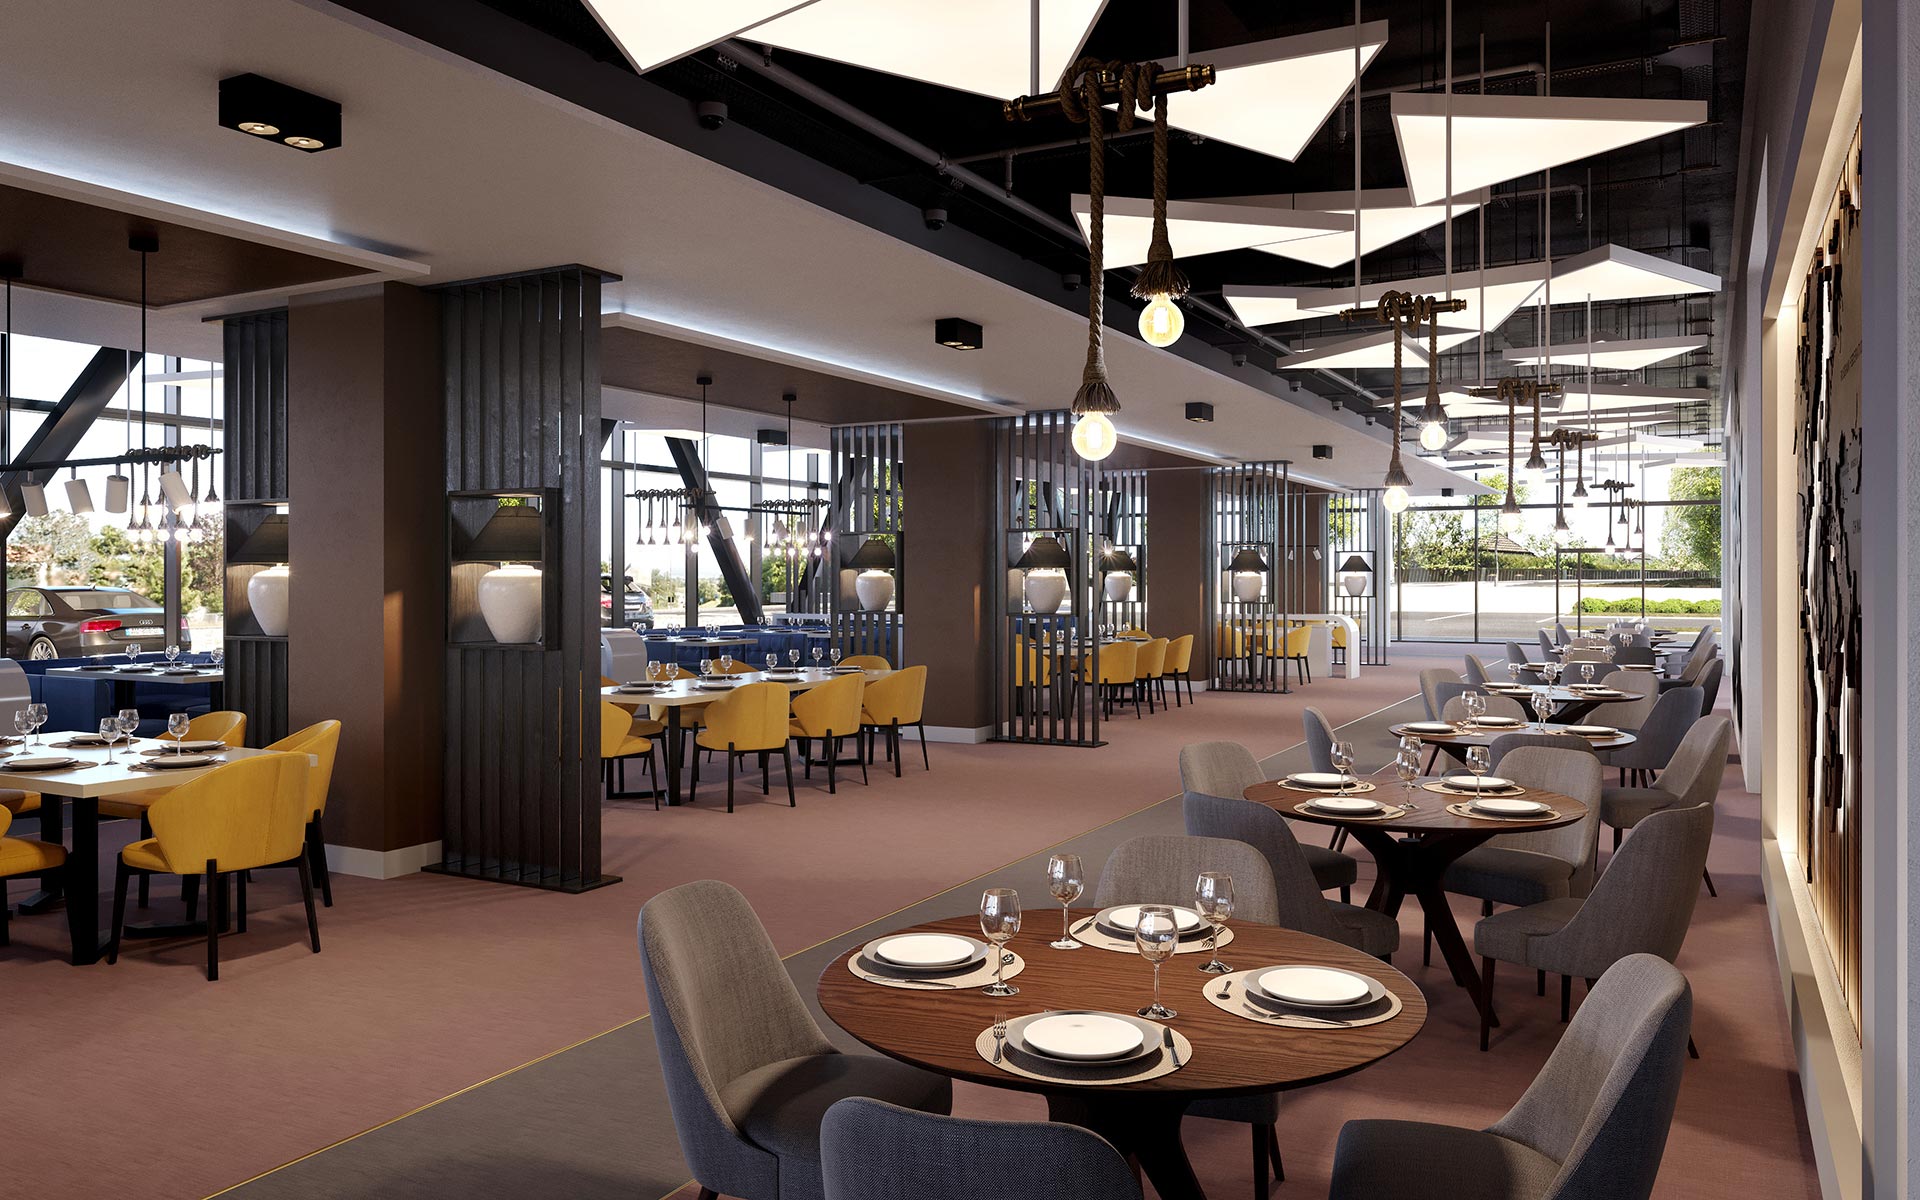 3D restaurant visualization for the development of a hotel